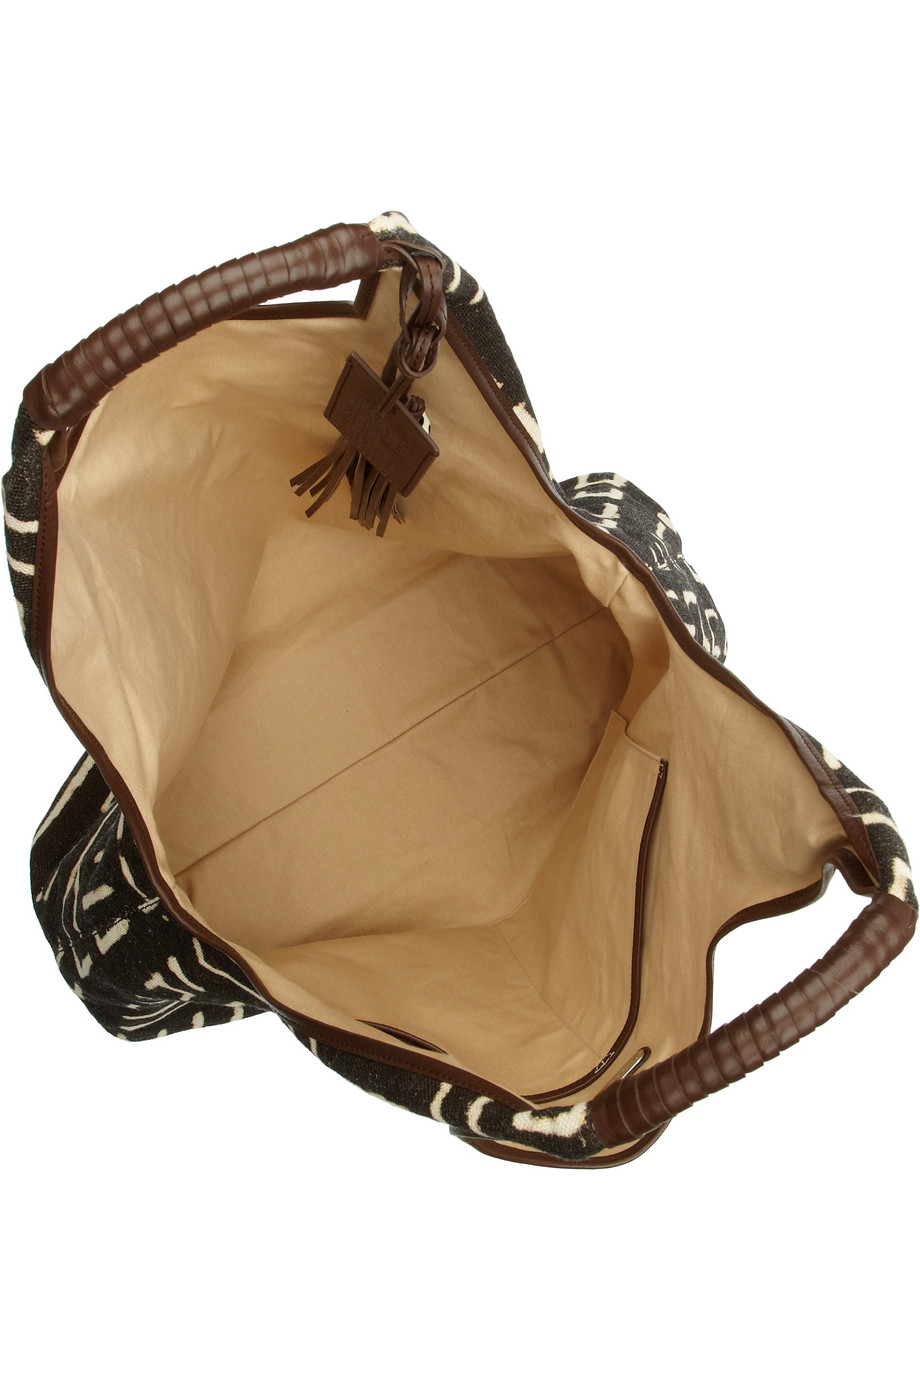 Ralph Lauren Collection Leather-trimmed Printed Canvas Hobo Bag in Chocolate (Brown) - Lyst